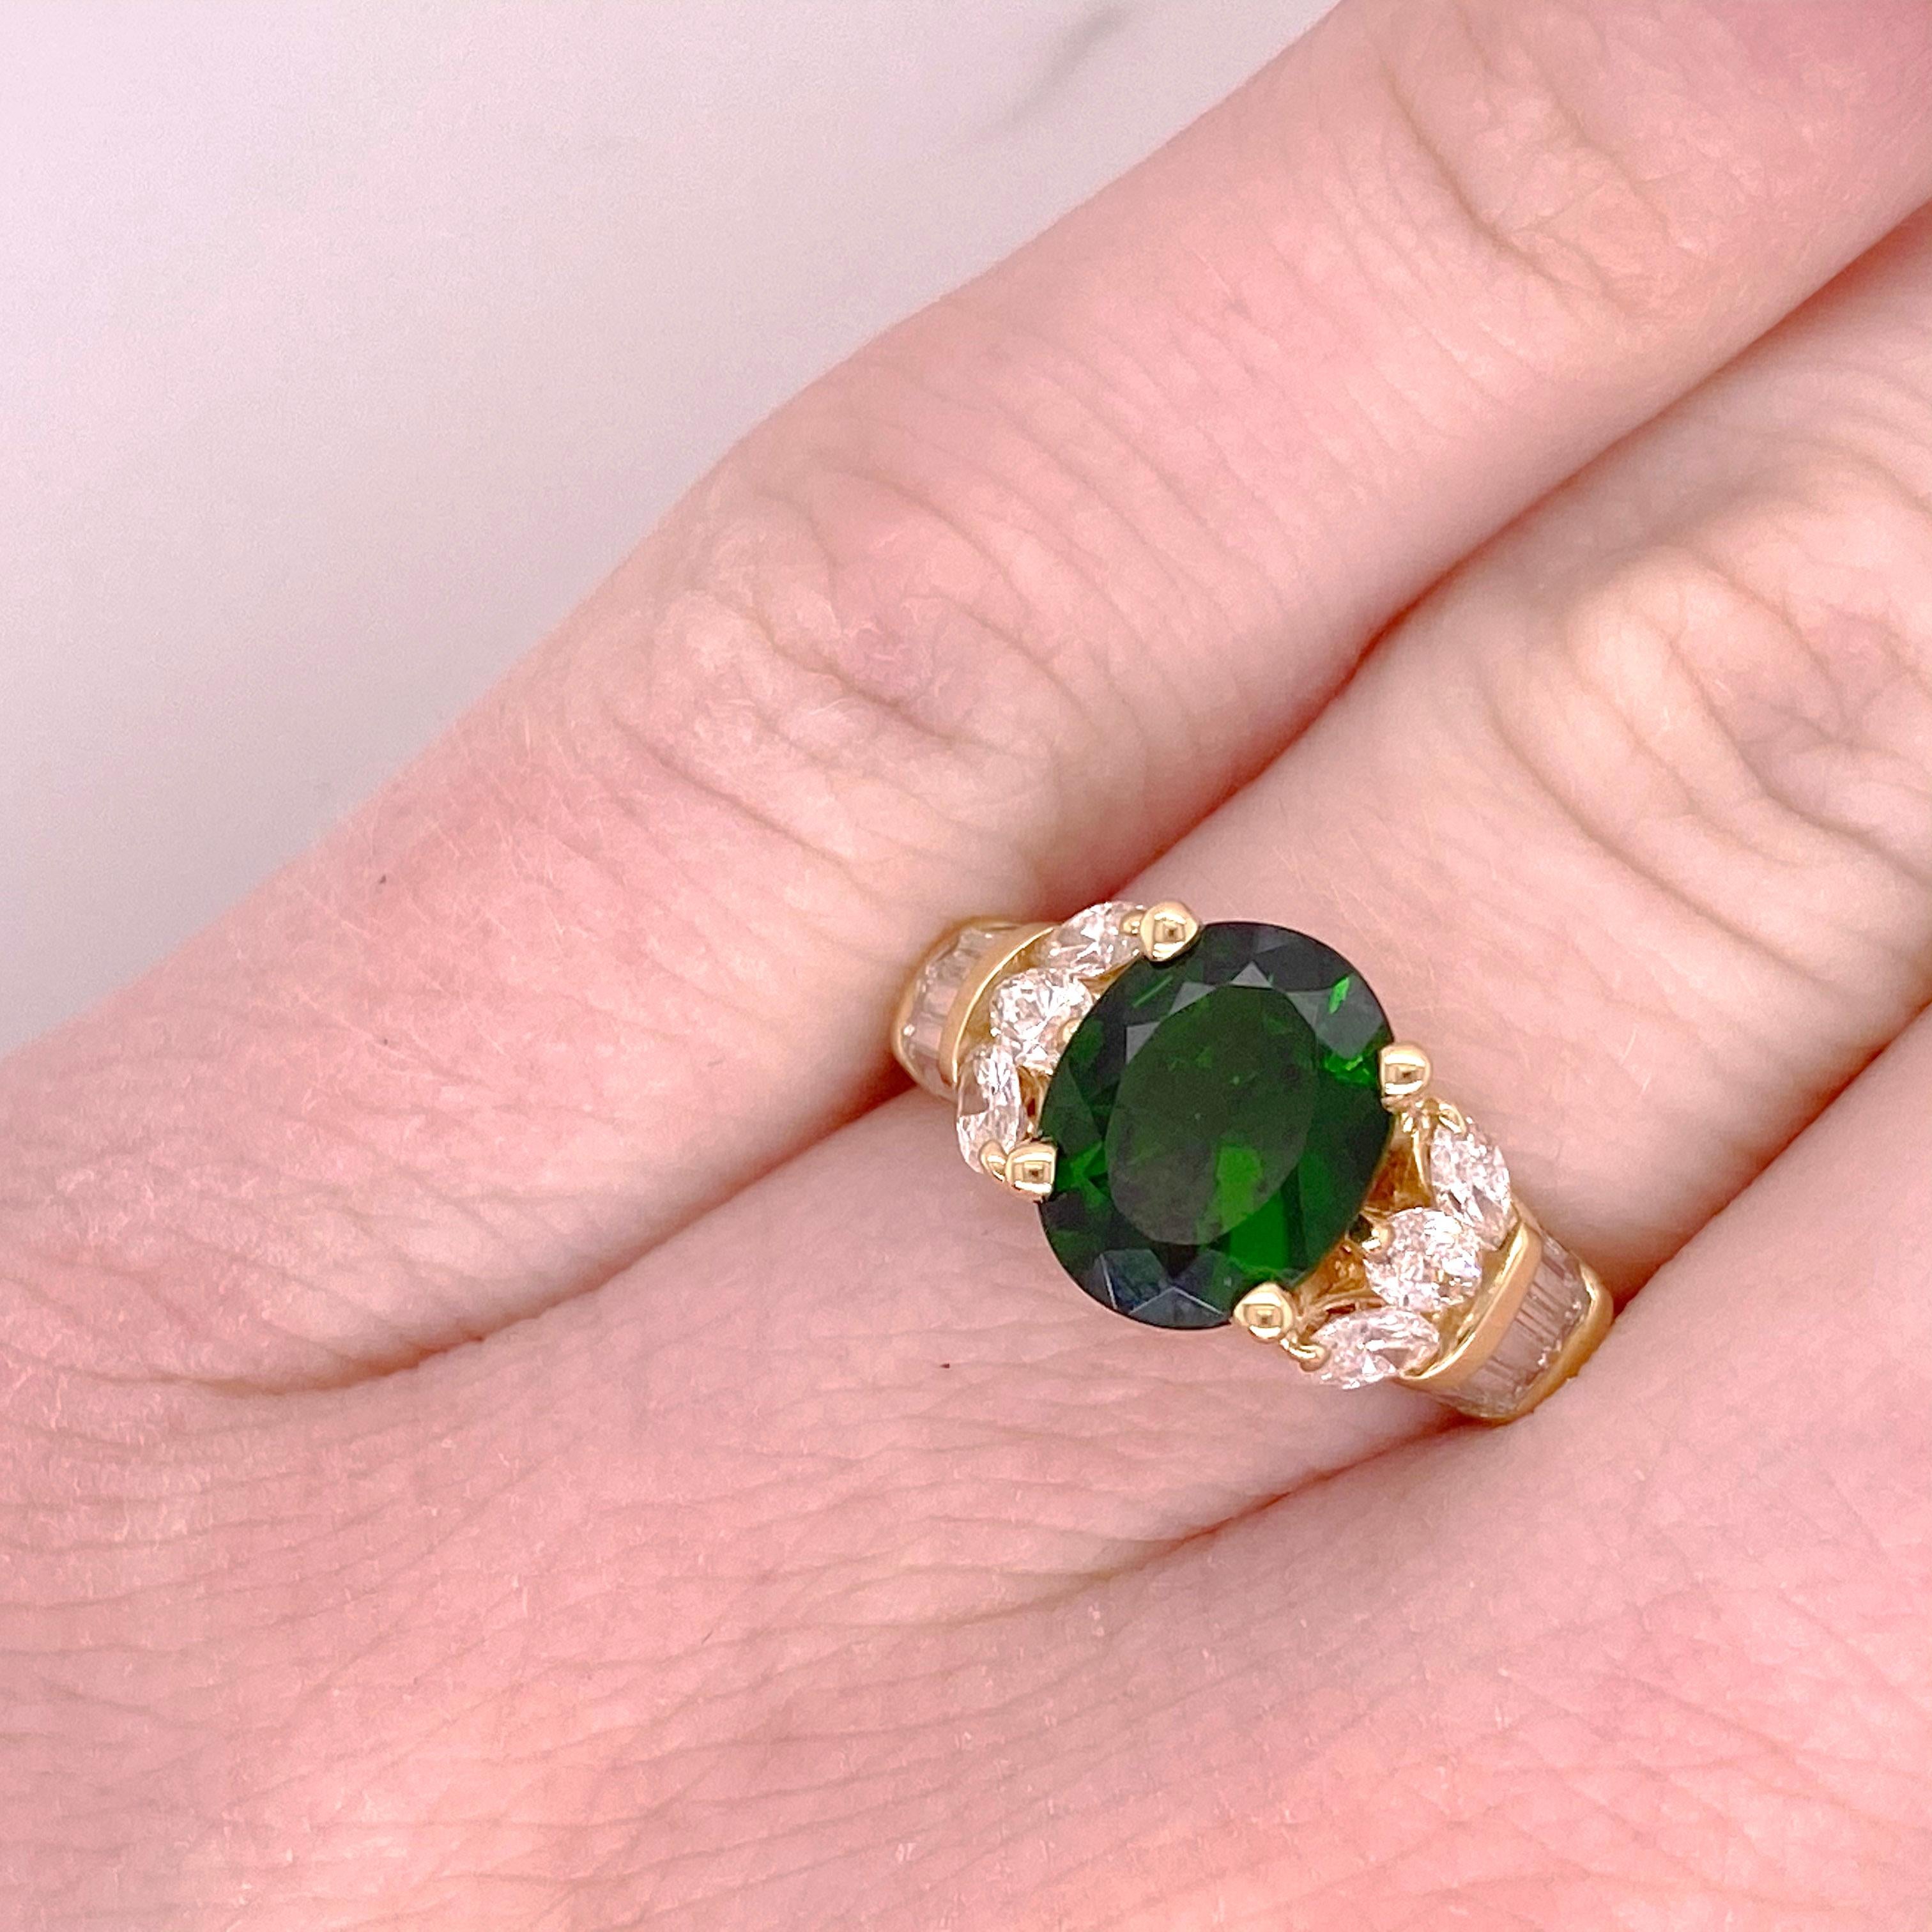 Genuine, Natural Green Gemstone-Russalite Both Rare and Precious. Discovered in 1988 deep in the Siberian Mountains and mined only four months per year, Russalite is one of the newest, most exciting gemstones. An all natural untreated gem of unique